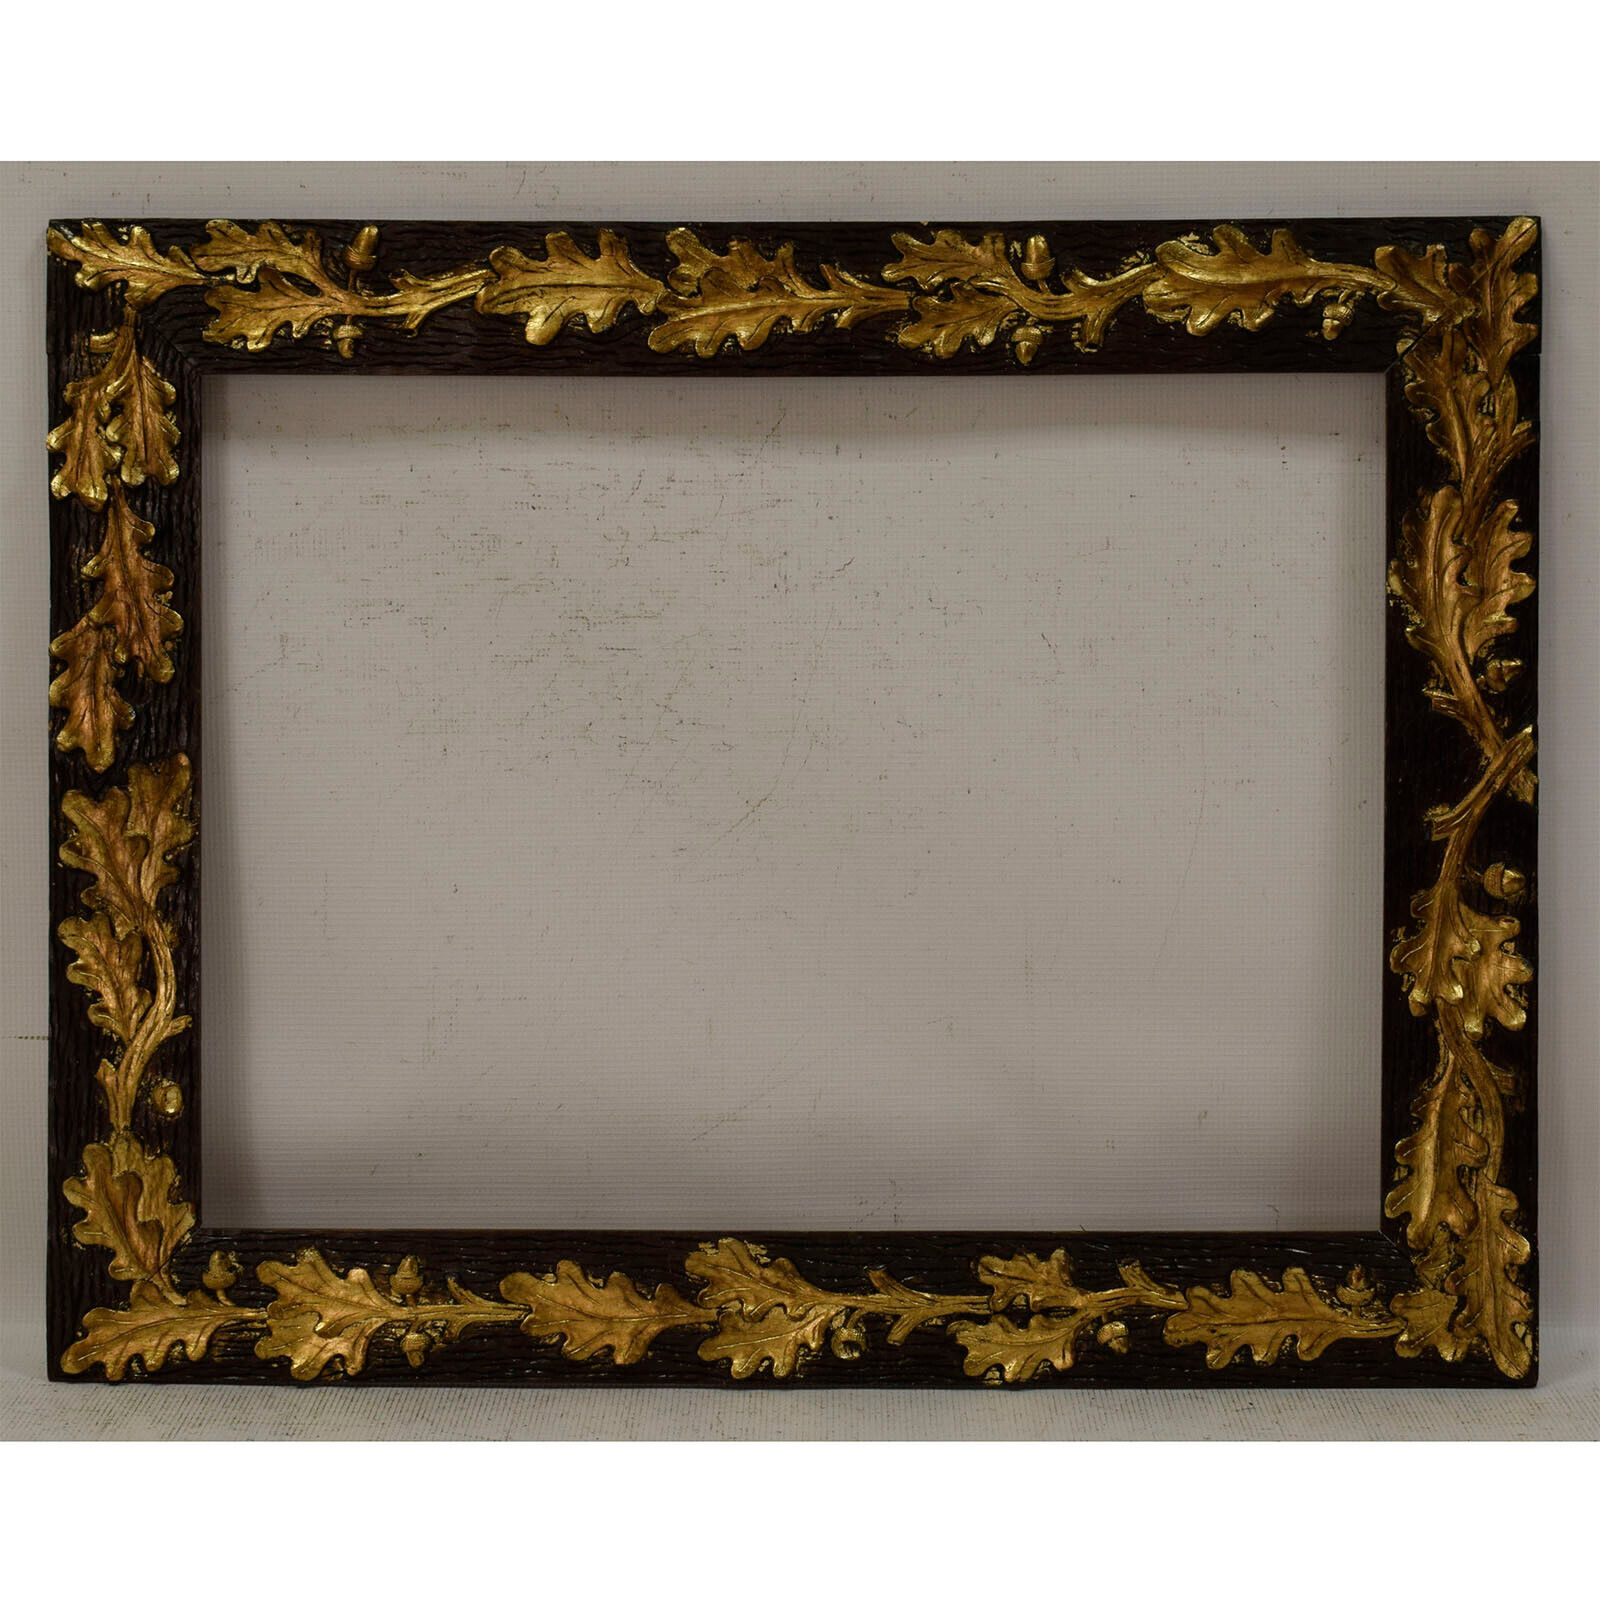 Ca 1900 Old wooden frame decorative with metal leaf Internal: 22,4x16,3 in